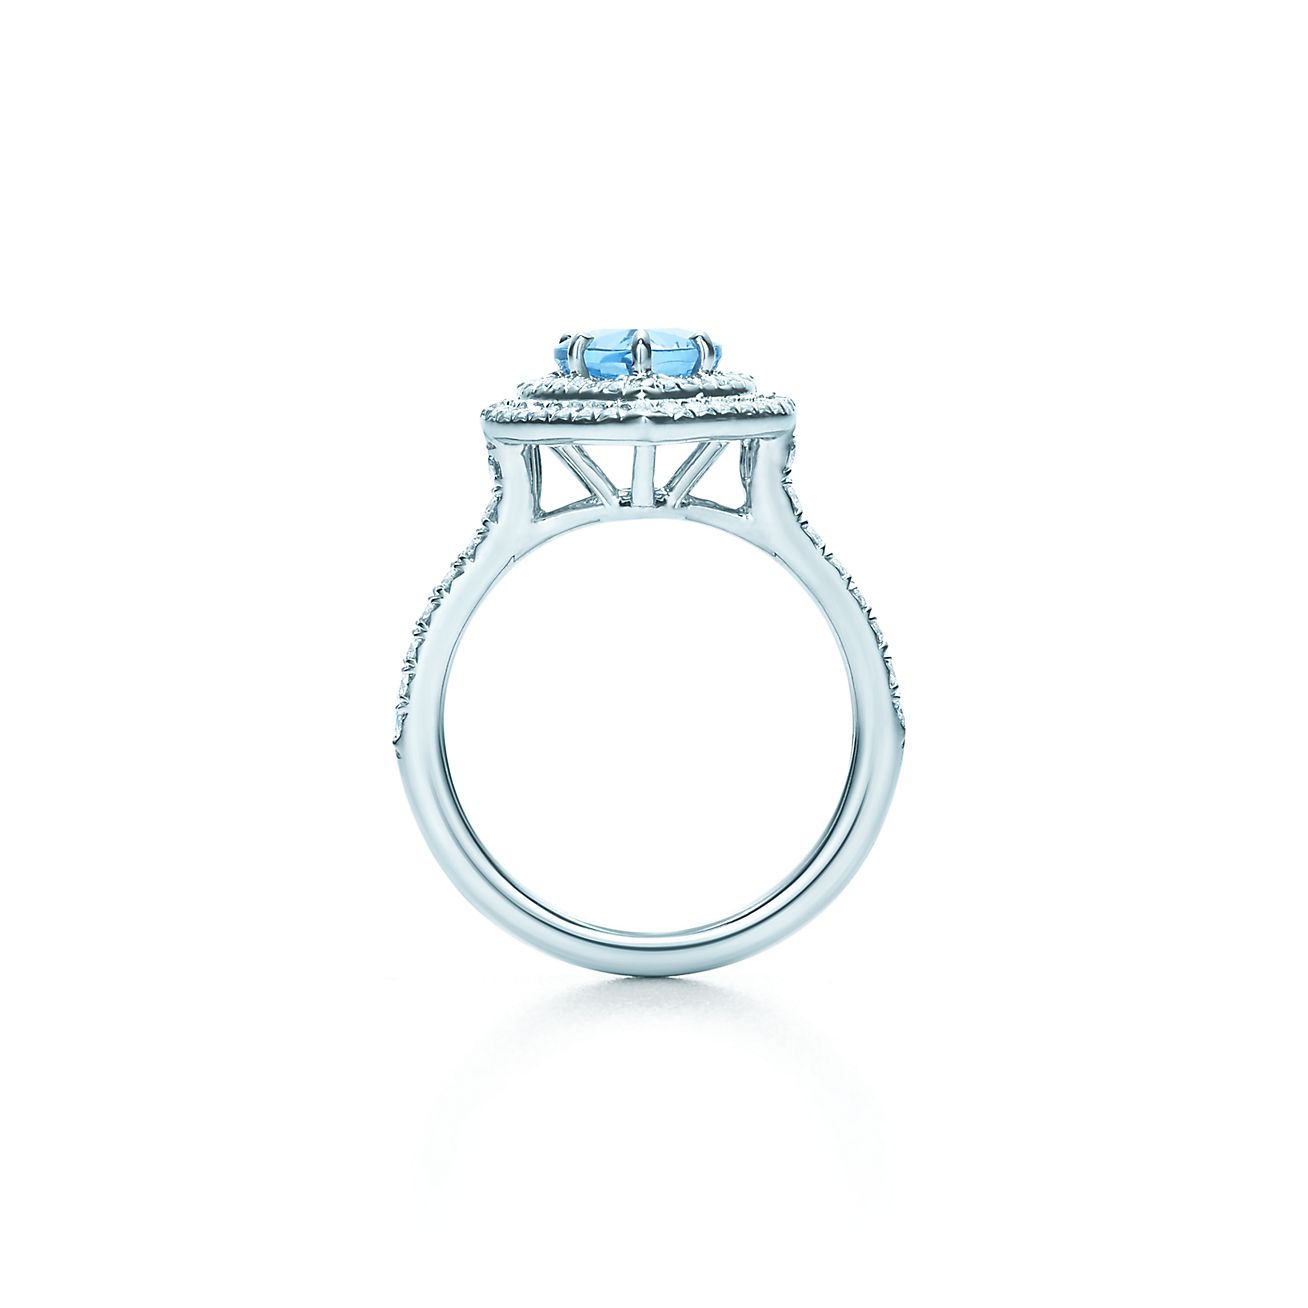 Tiffany Soleste ring in platinum with 